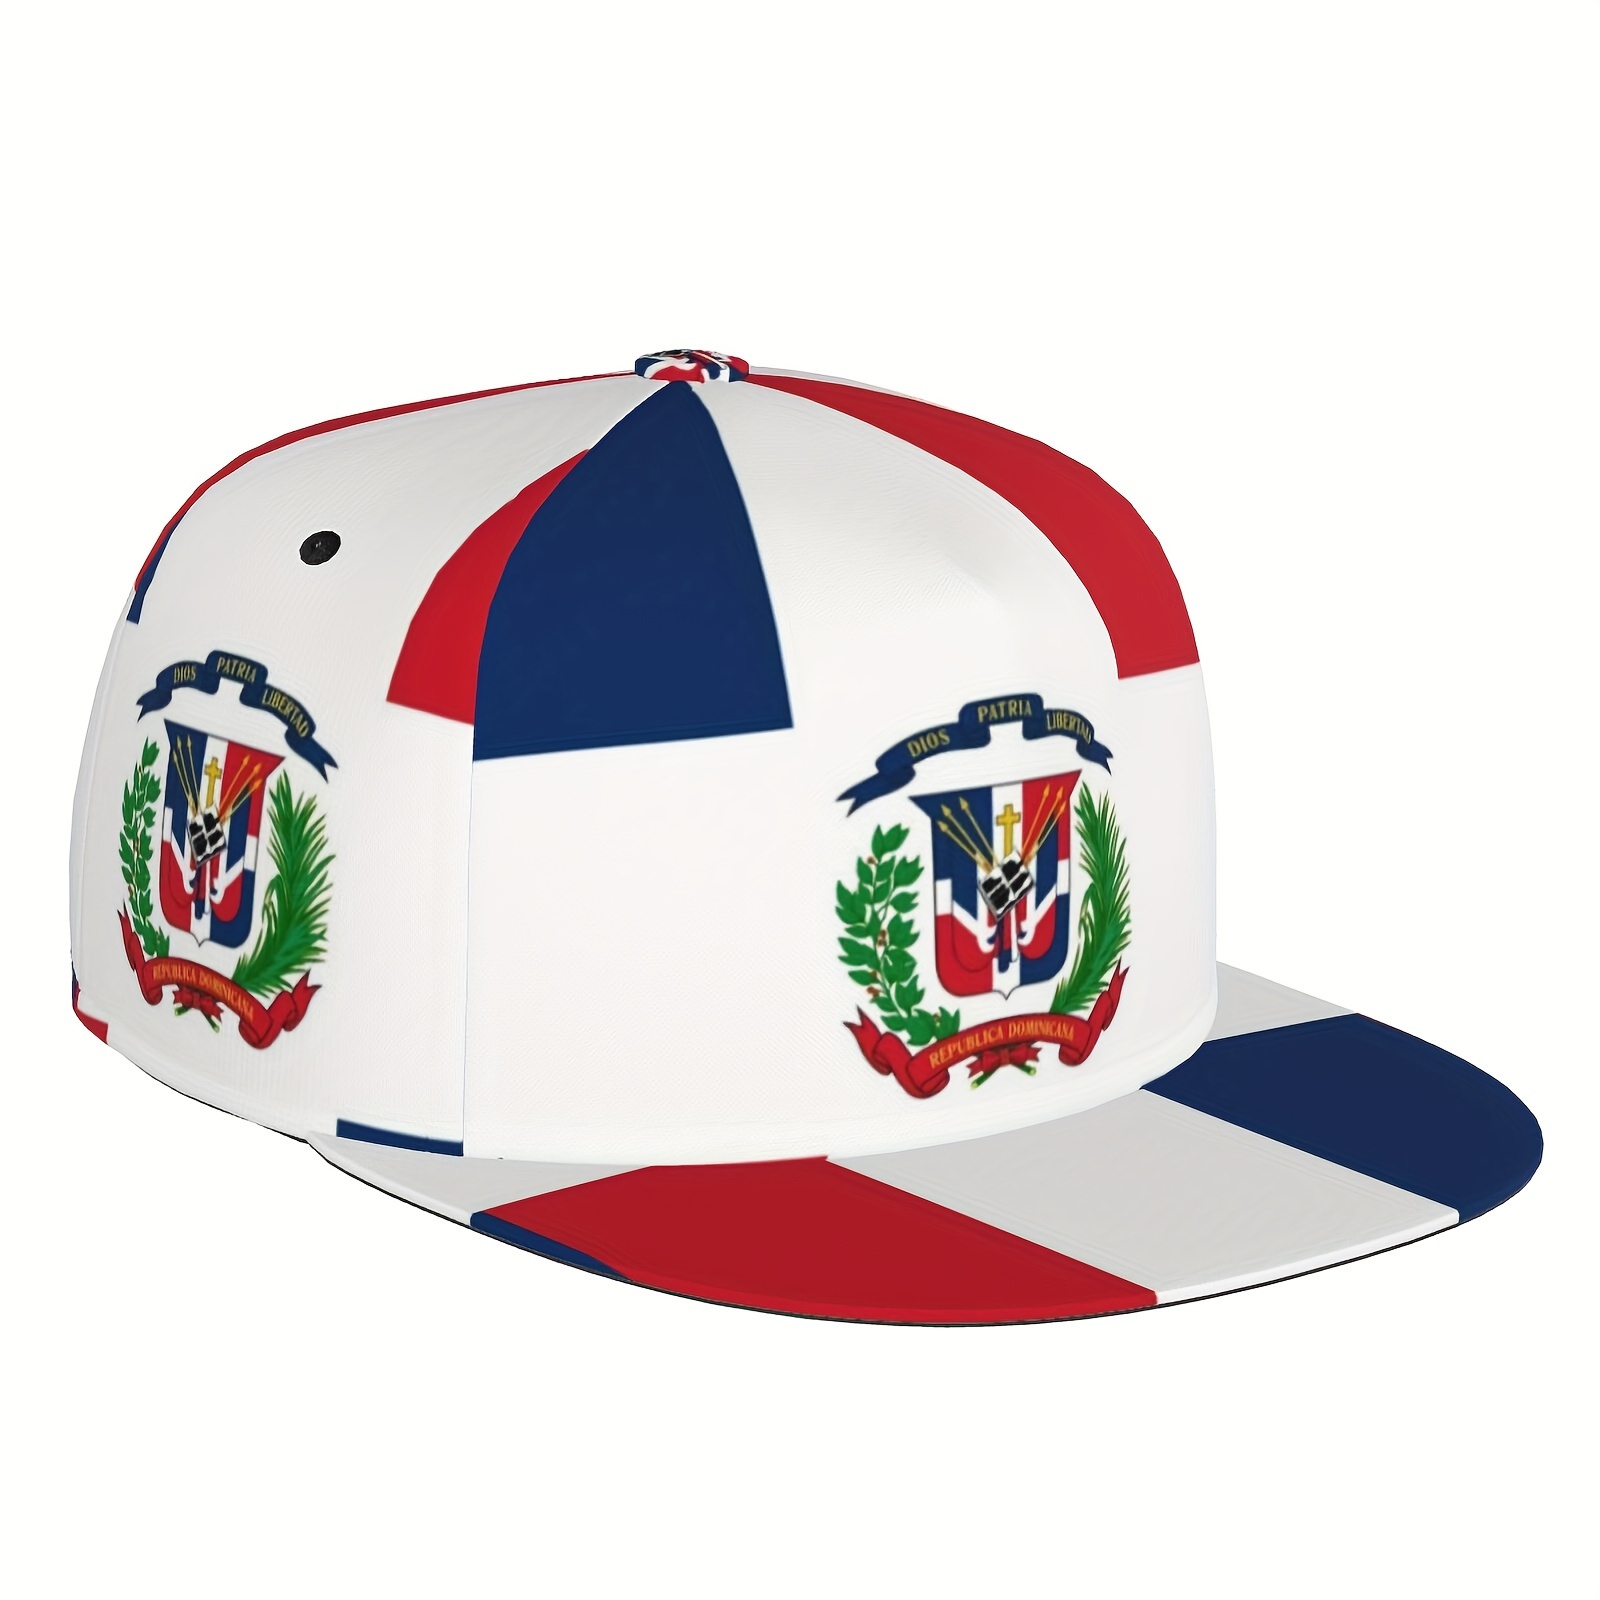 

Cool Hippie Flat Brim Baseball Cap, Flag Of The Dominican Republic Print Punk Trucker Hat, Snapback Hat For Casual Leisure Outdoor Sports, Dance & Skate Boarding